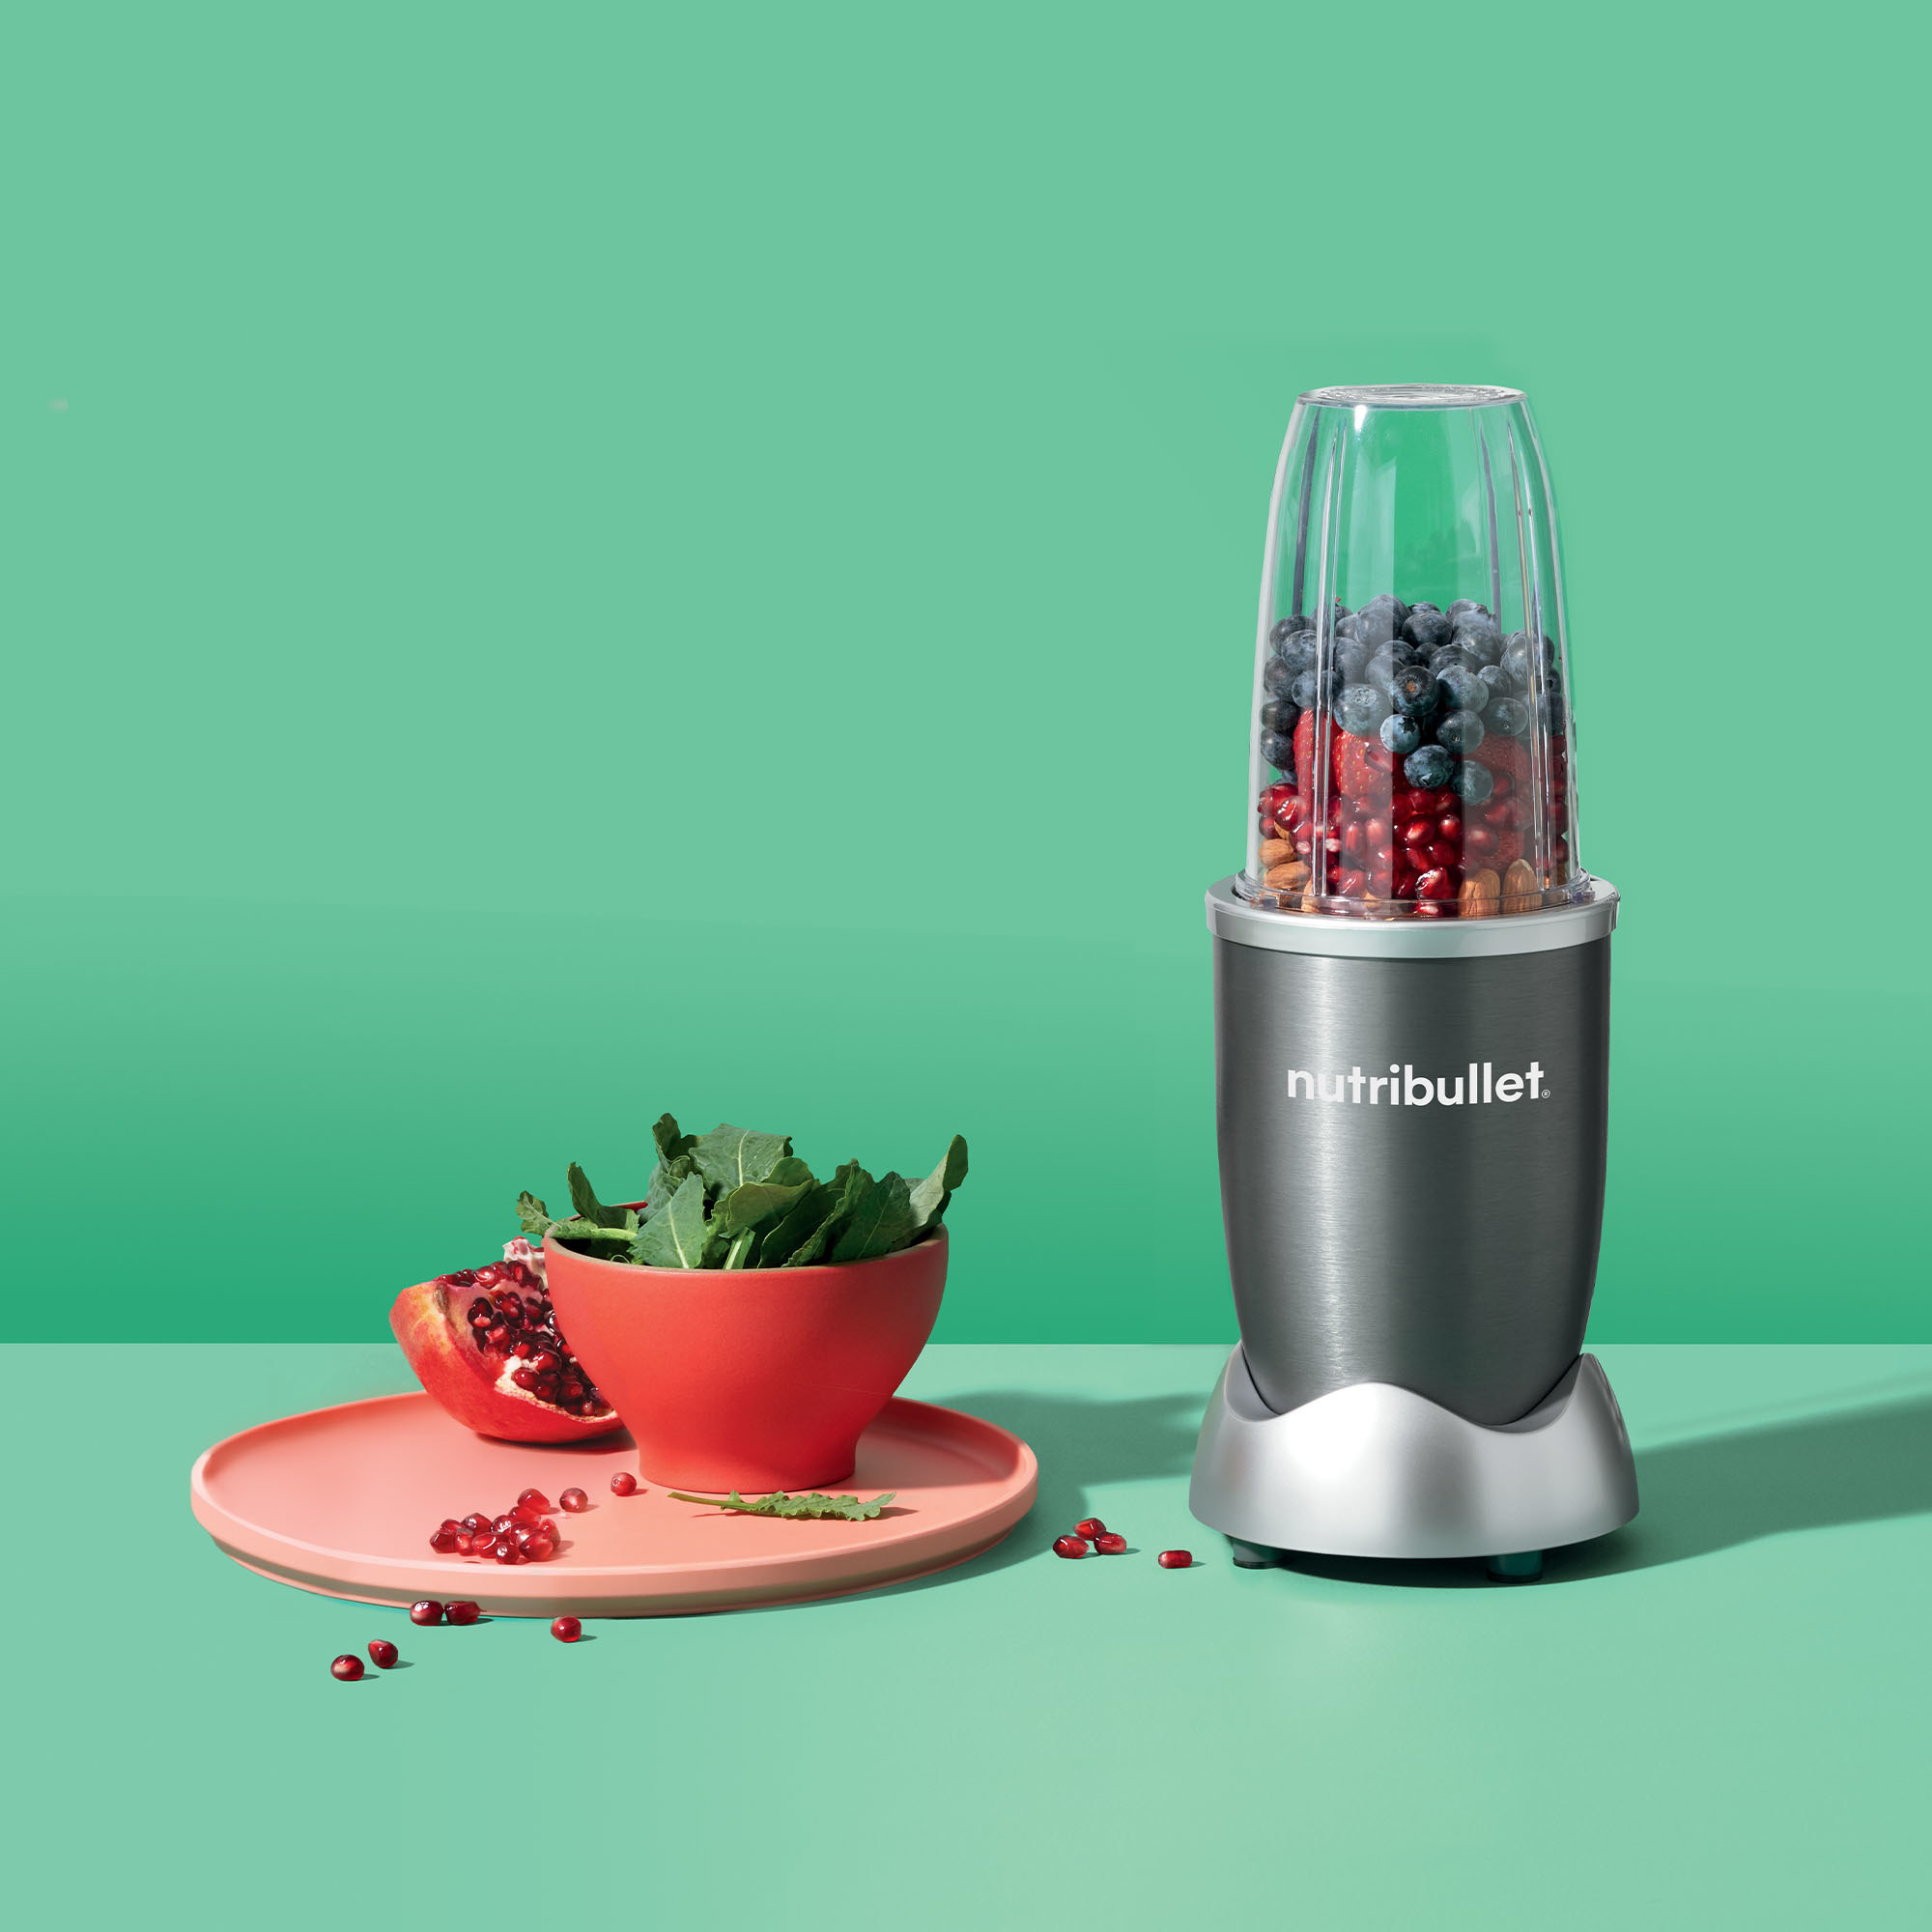 The blender filled with fruit next to a bowl of leafy greens